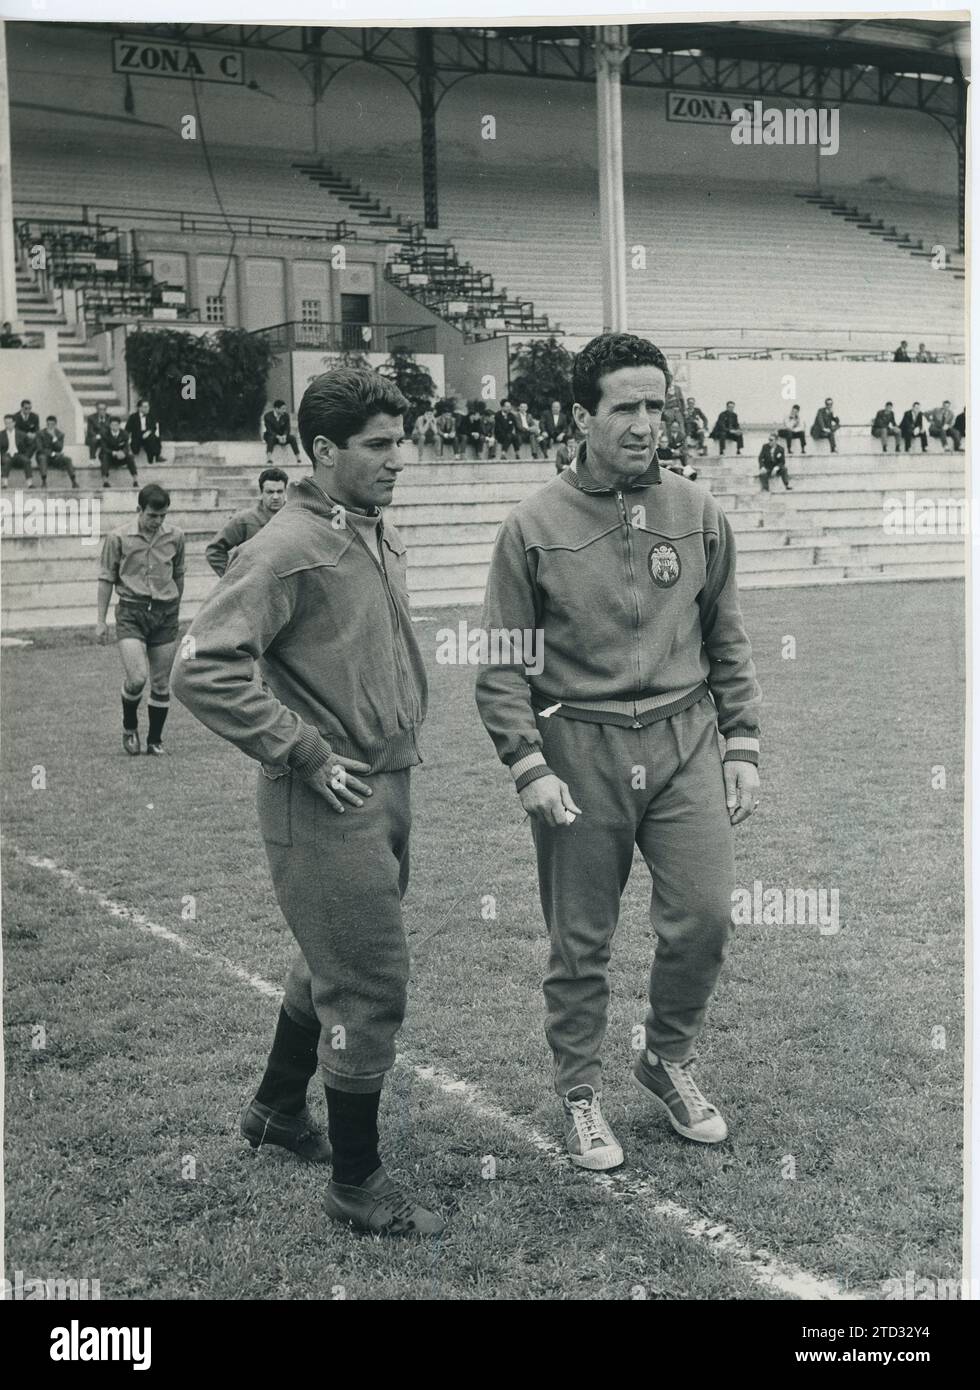 Madrid, May 1960. Training of the Spanish team at the Metropolitano. In the image, Helenio Herrera, with Enrique Collar. Credit: Album / Archivo ABC / Teodoro Naranjo Domínguez Stock Photo